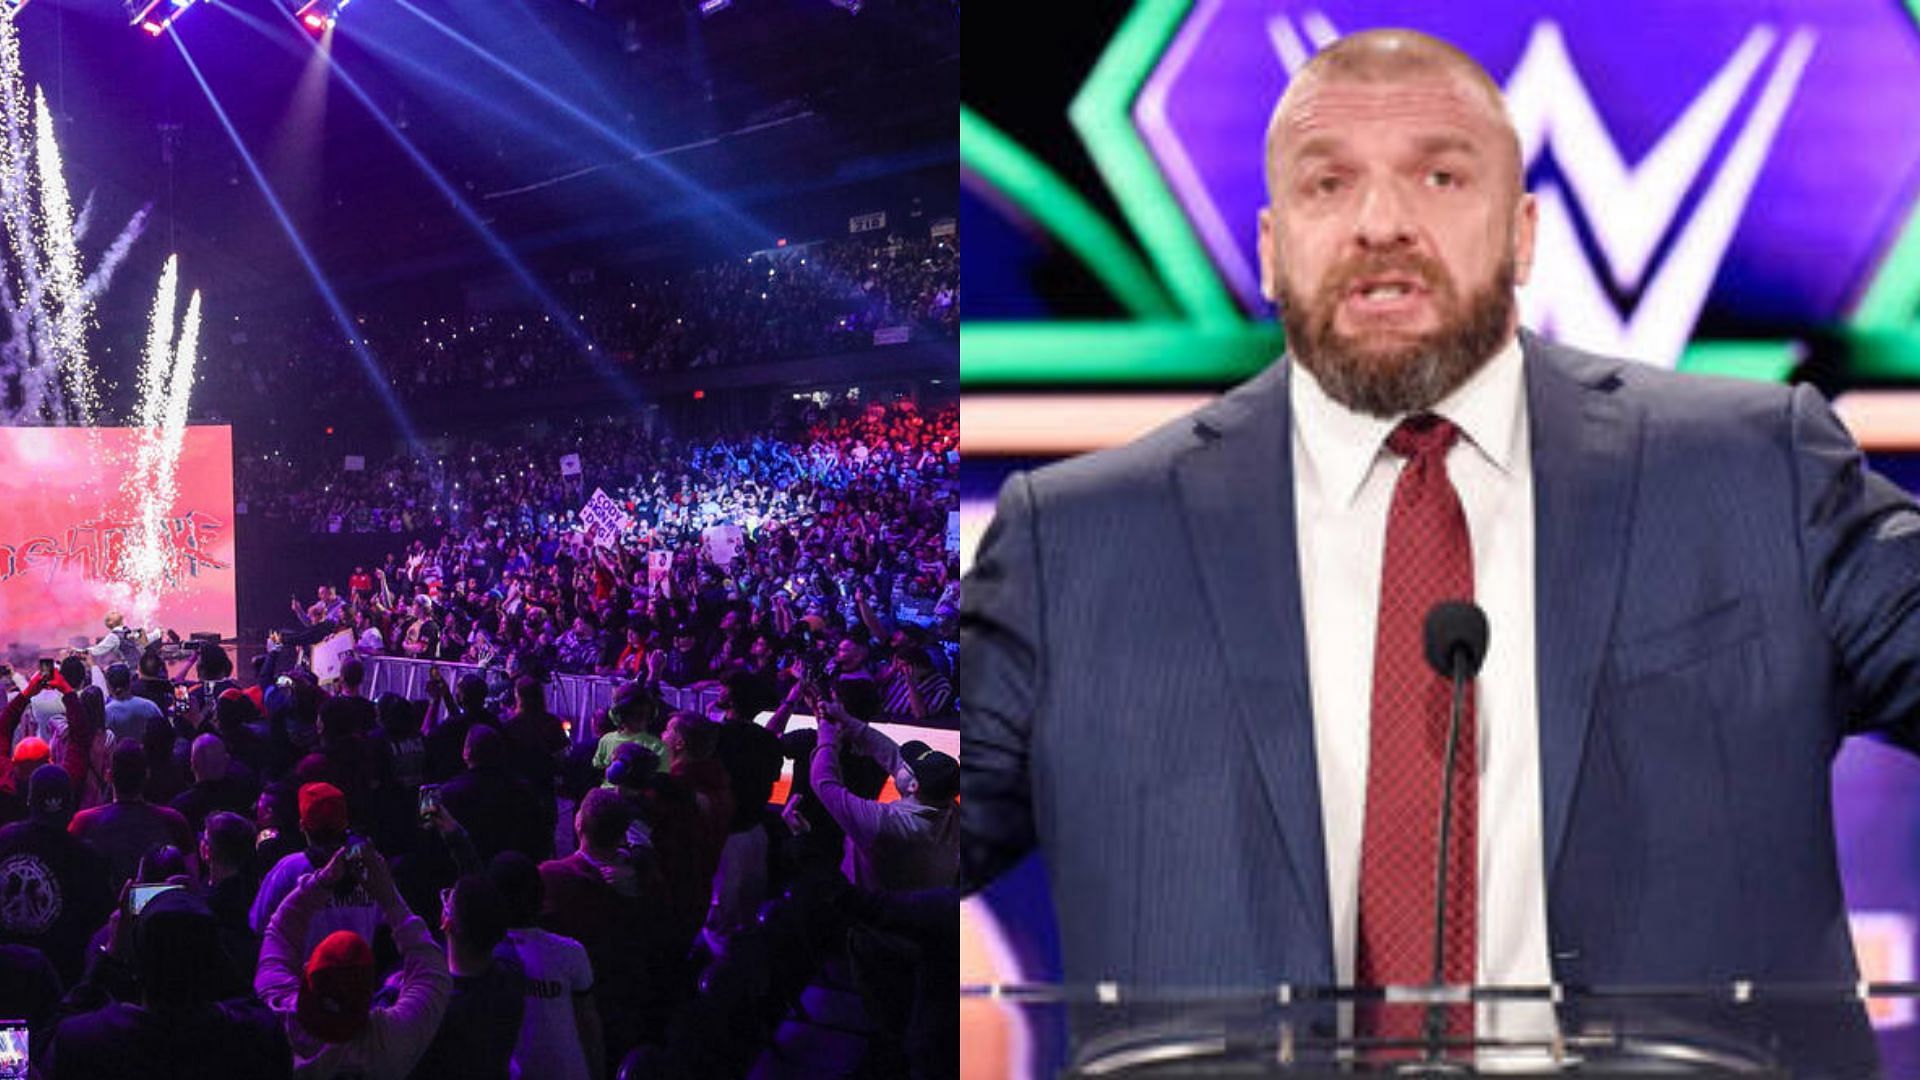 Triple H has taken over in the company and there have been some changes